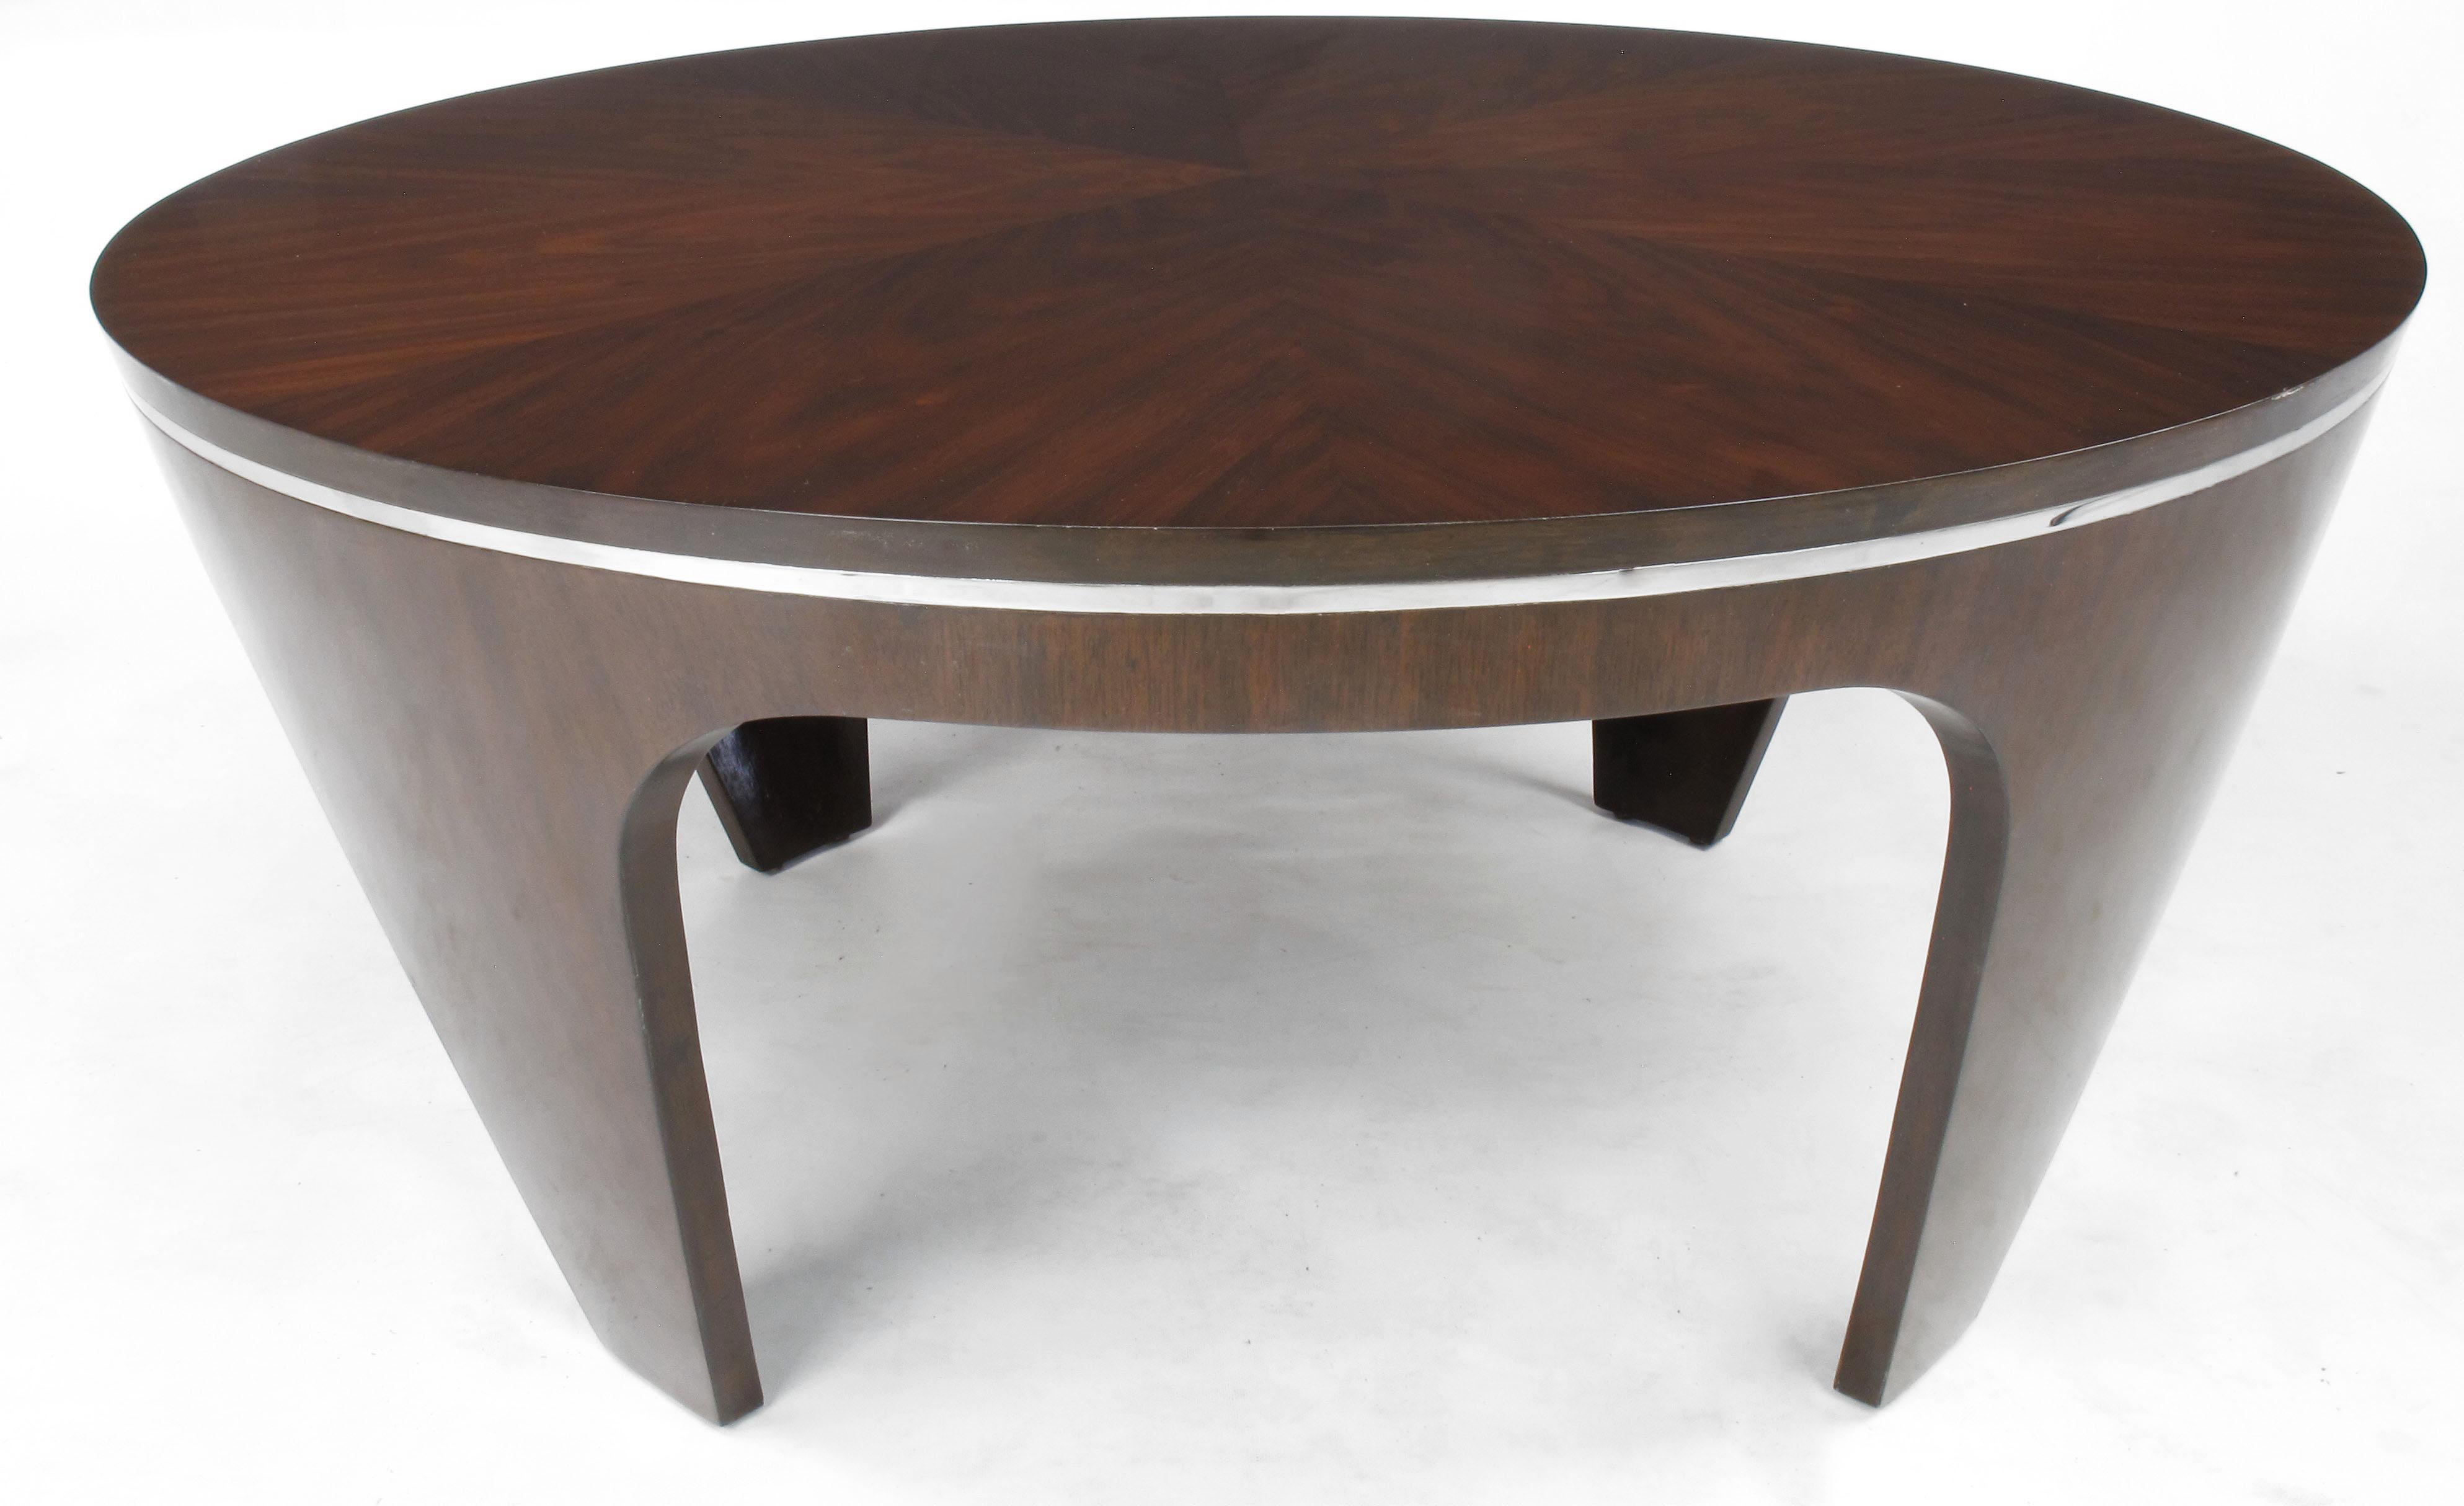 Italian Art Deco Revival Round Mahogany Coffee Table with Parquetry Top 2